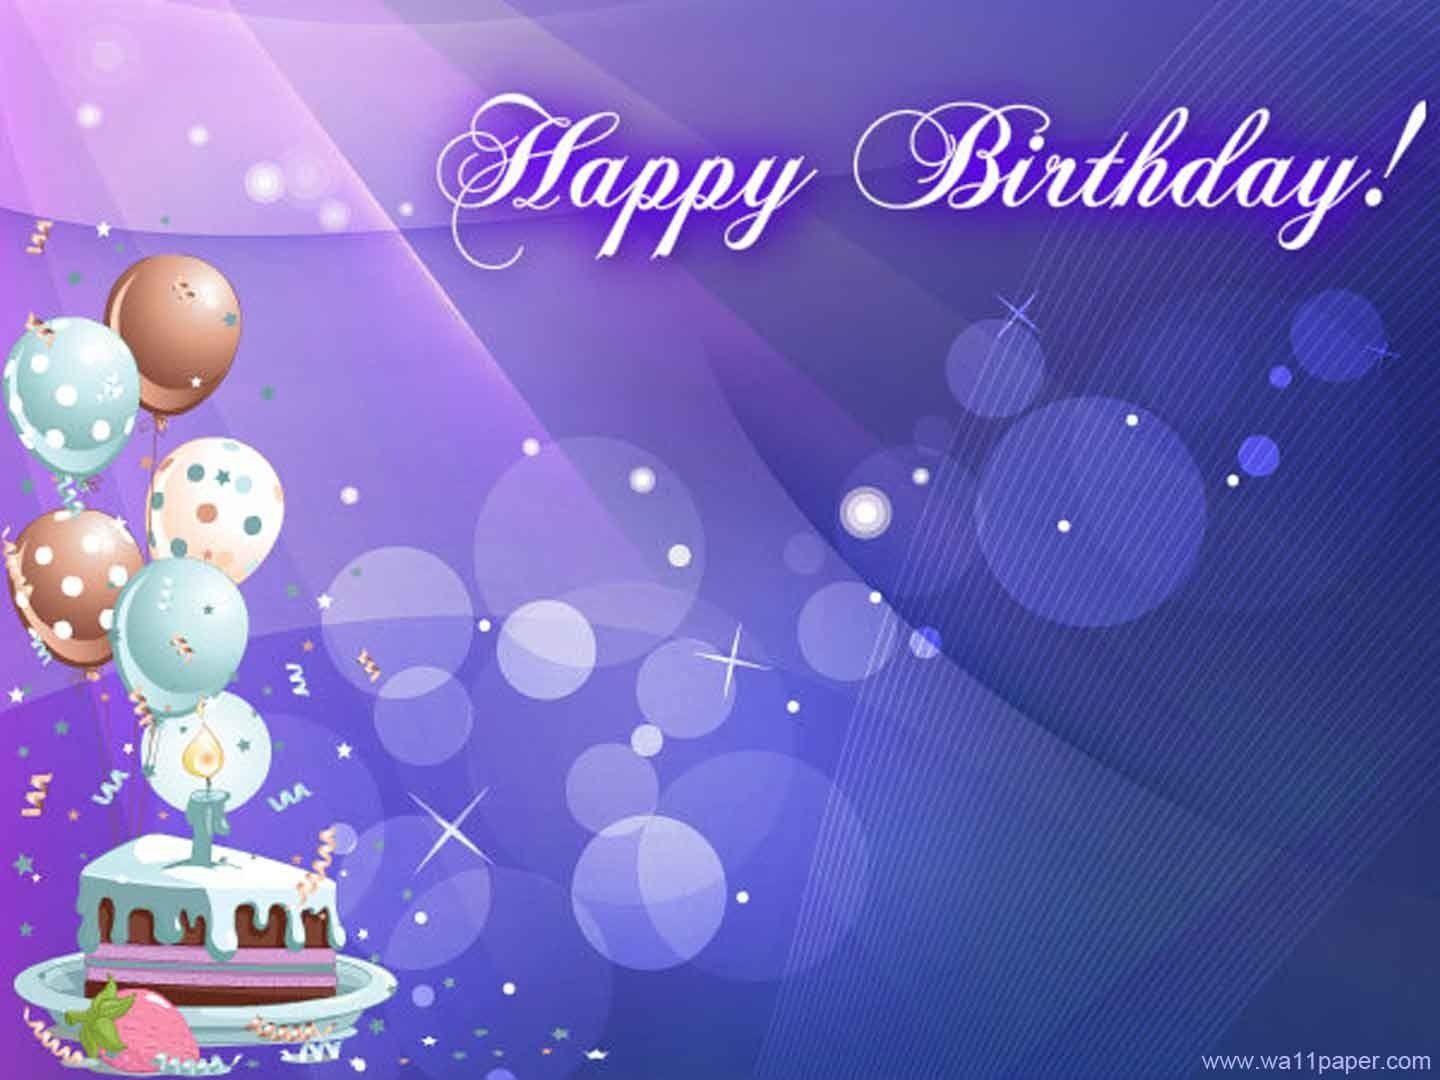 Happy birthday background vector free vector download Free. HD